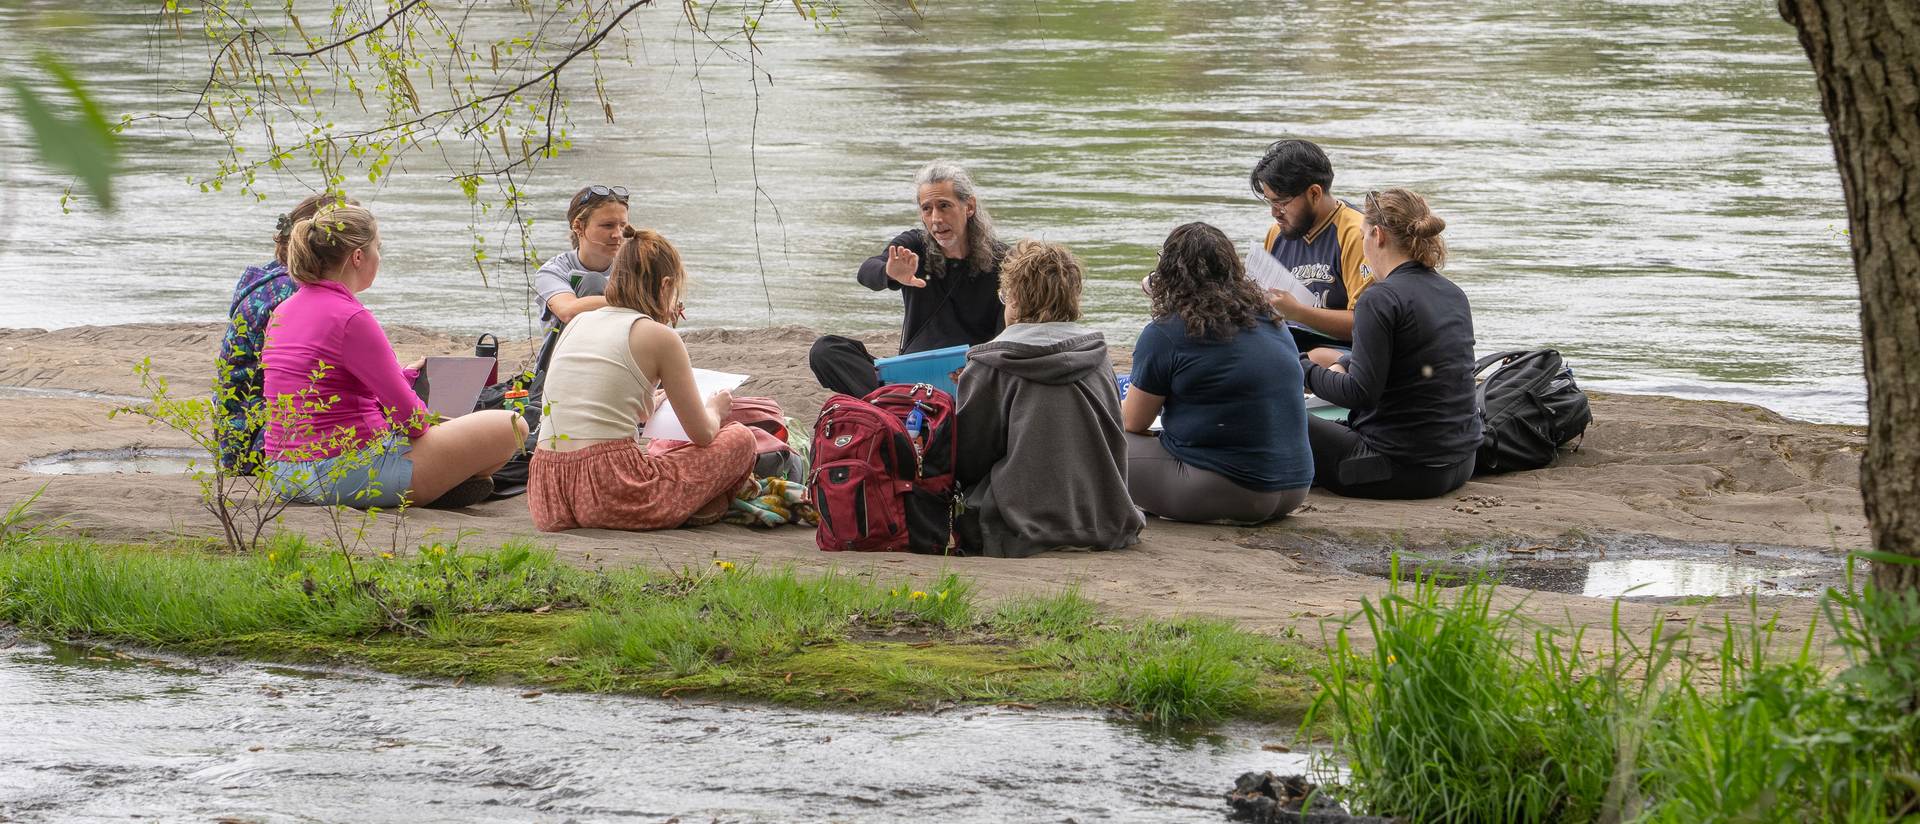 Students sit in a circle and listen to their professor speak while they sit on a rock near the river.